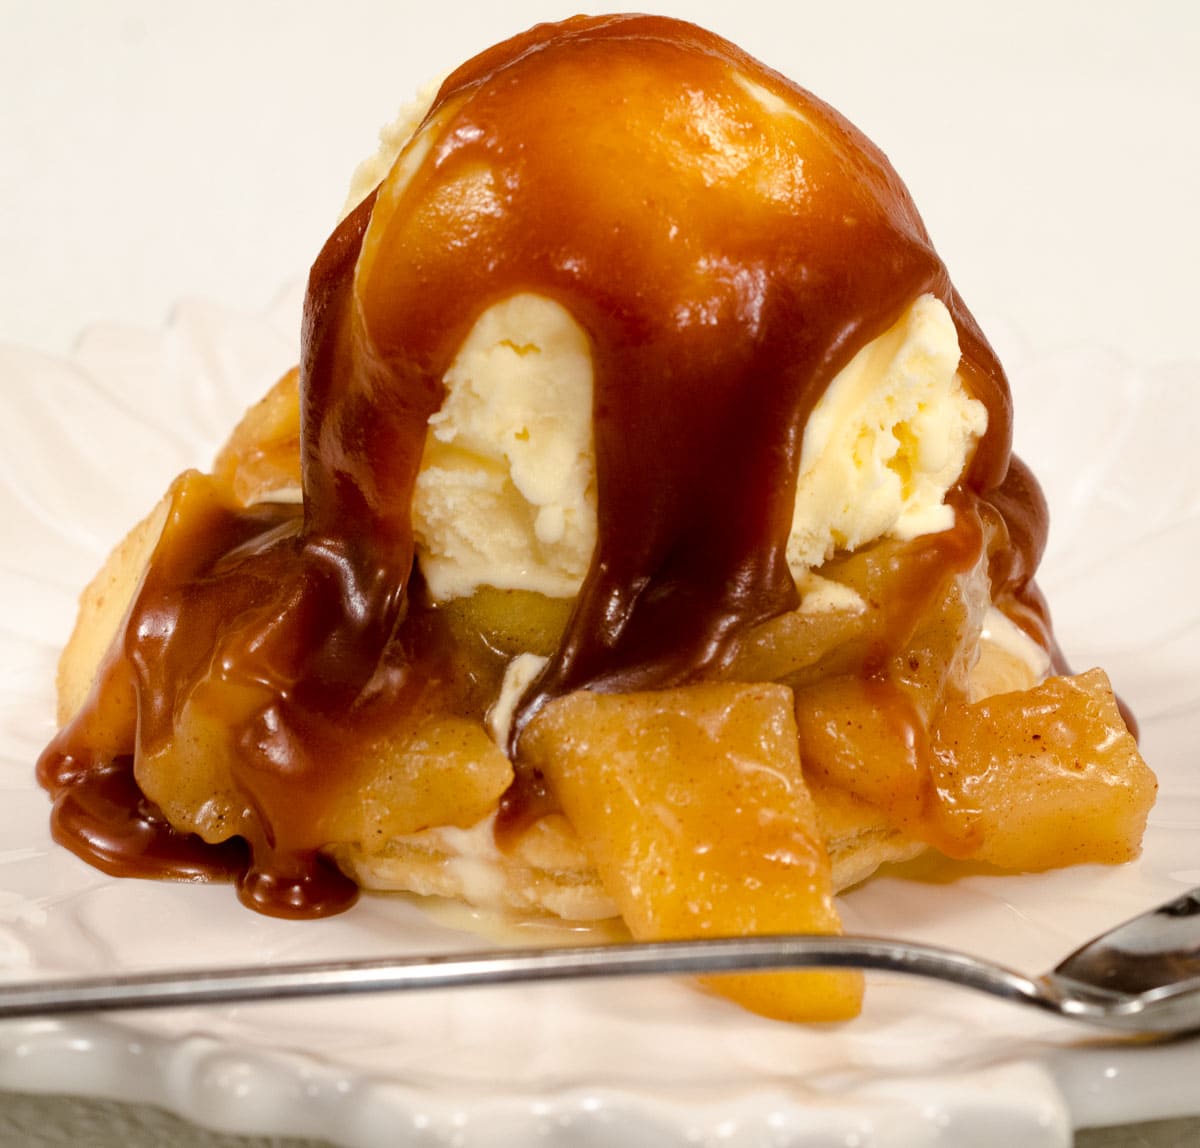 A caramel topped scoop of ice cream with  roasted apples around it.